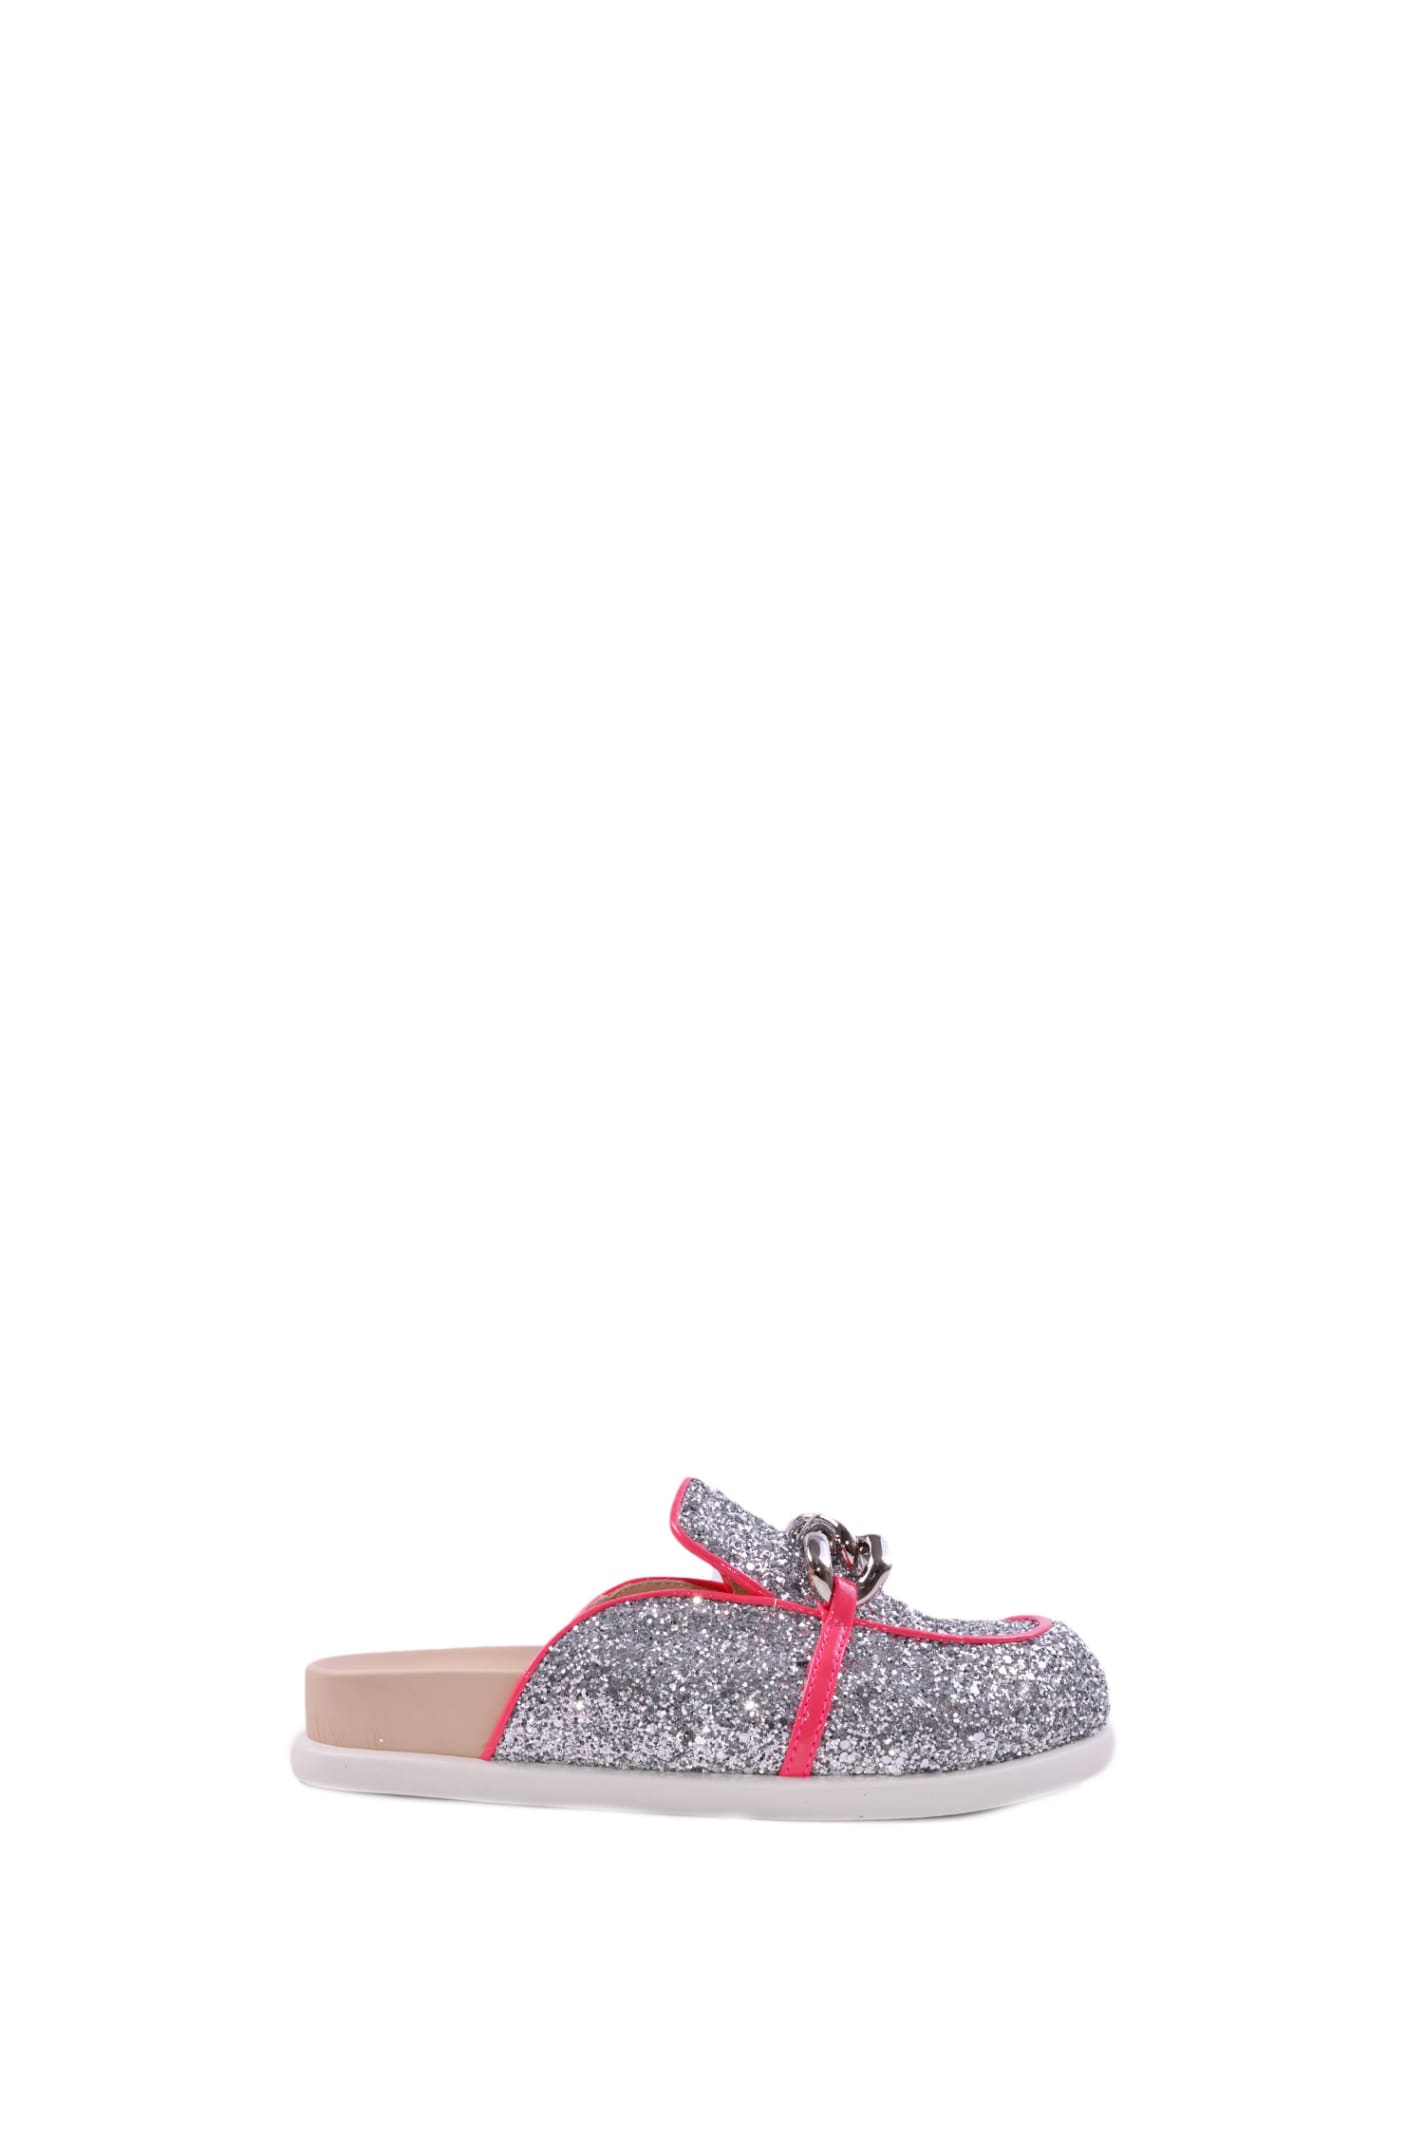 N°21 Kids' Sandals With Glitter In Grey